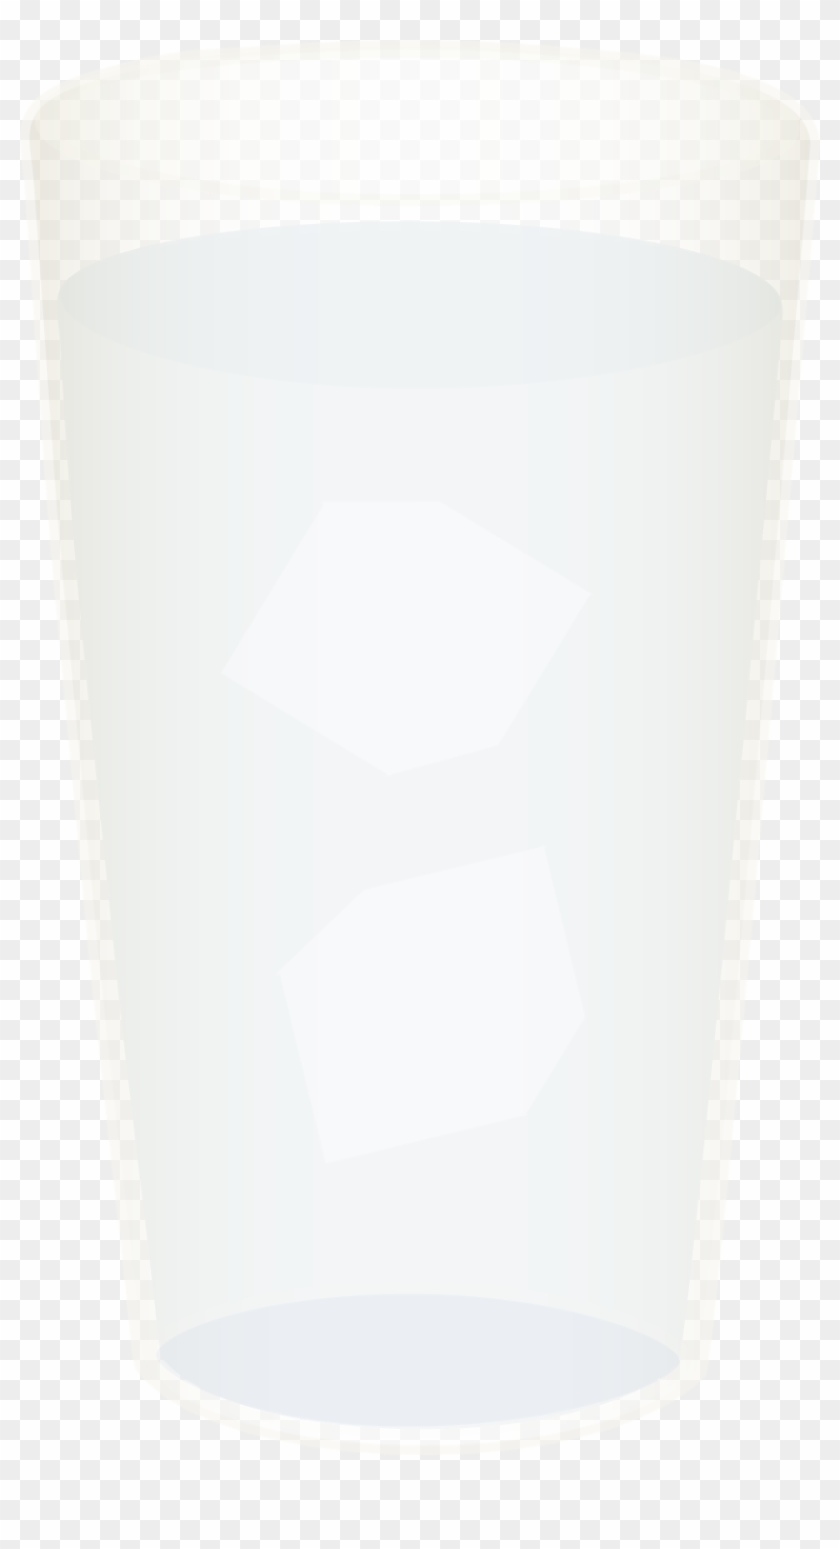 Glass Of Water With Ice Cubes Free Clip Art - Lampshade - Png Download #256228